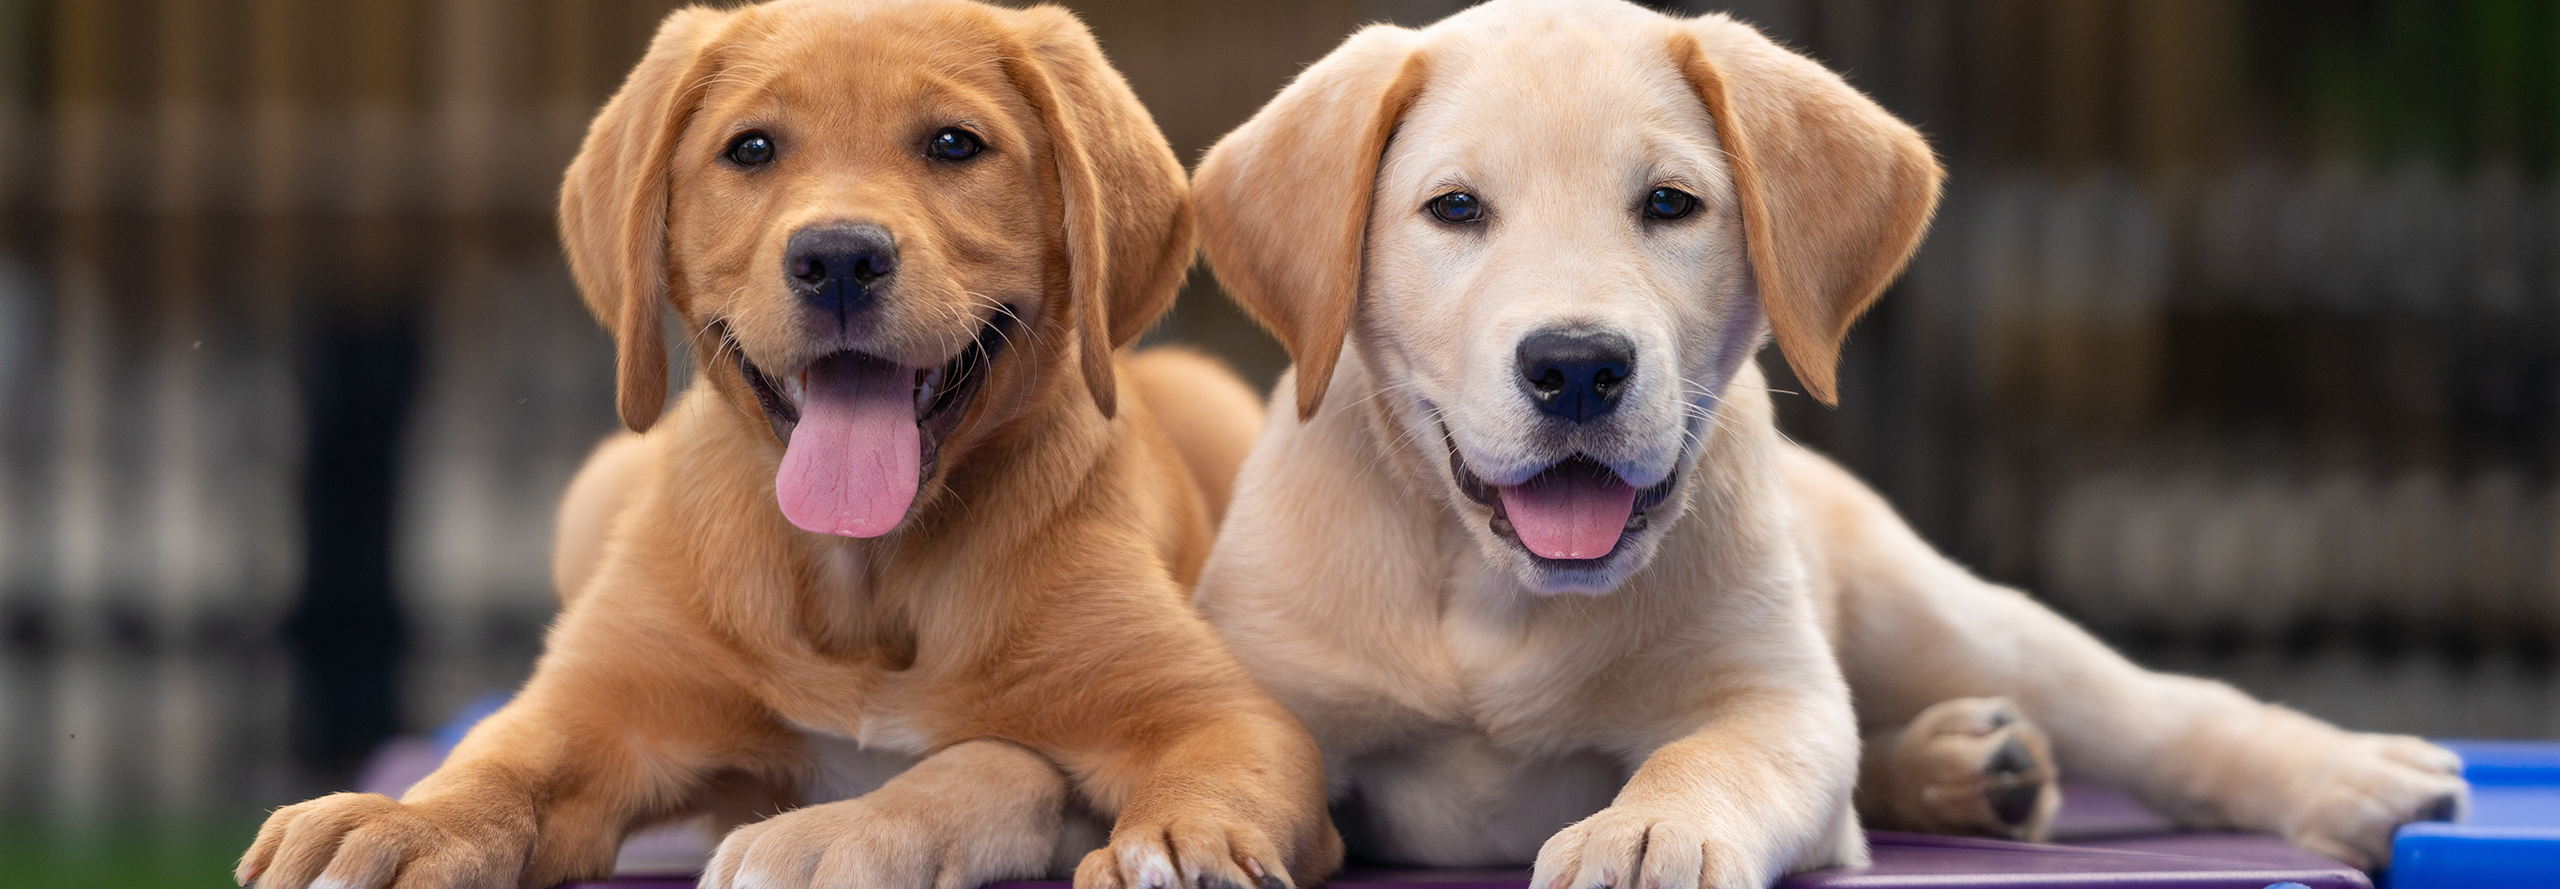 A pair of yellow Labrador puppies lie side by side.